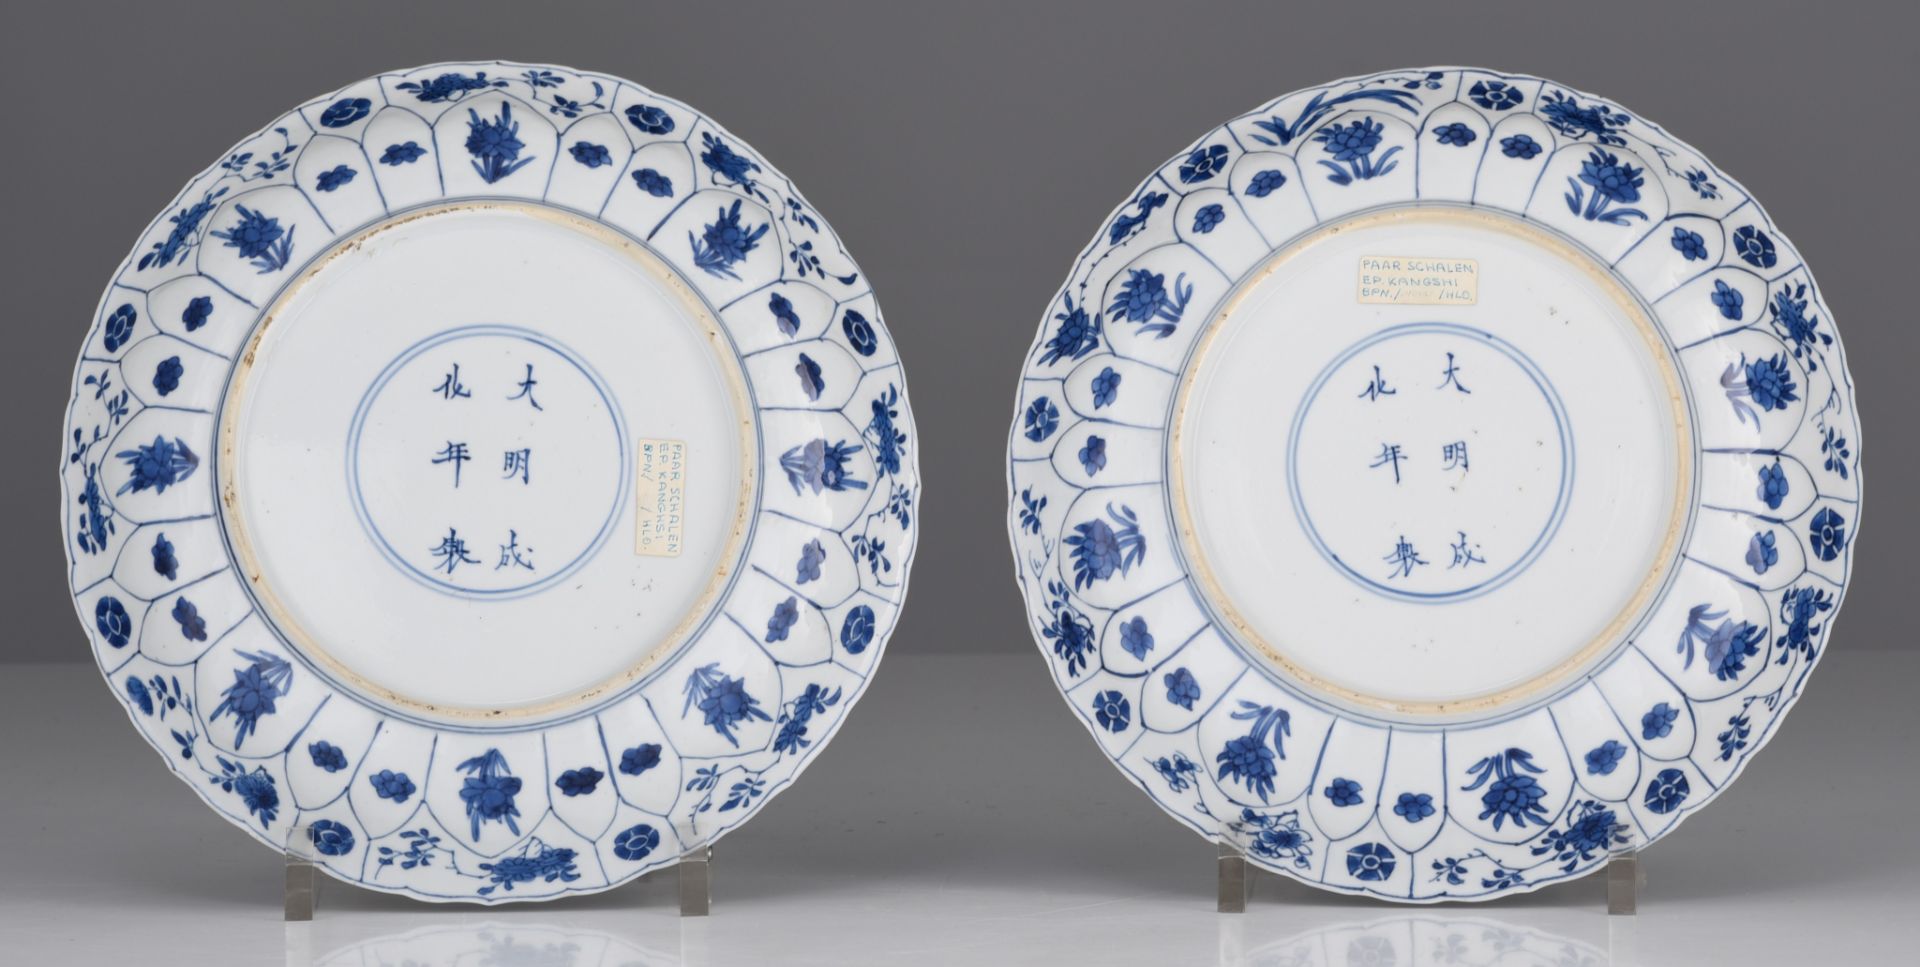 Two Chinese blue and white lobed plates, with a Chenghua mark, Kangxi period, ¯ 26 cm - Image 3 of 5